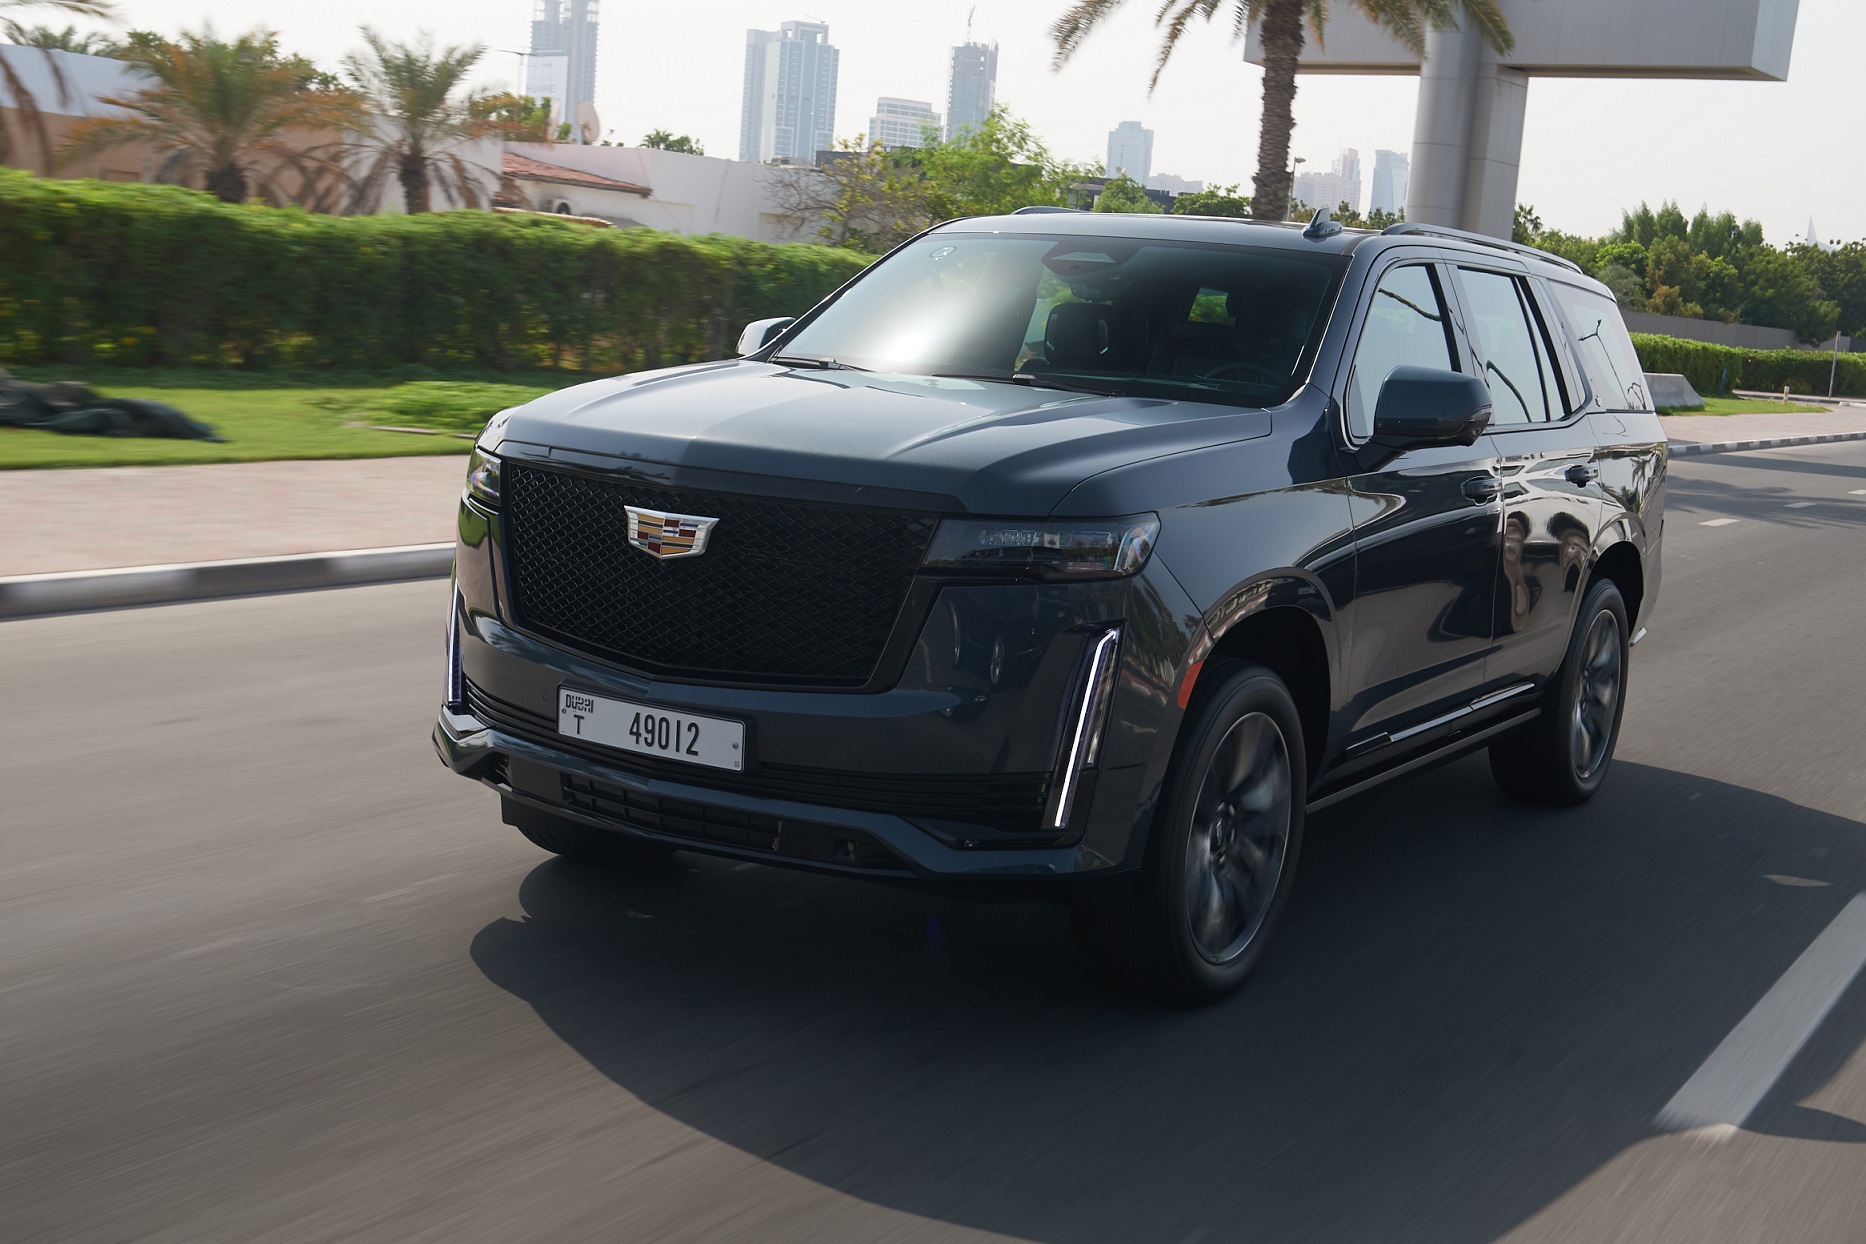 Image for 2021 Cadillac Escalade: Five Technology Features That Redefine Luxury SUVs